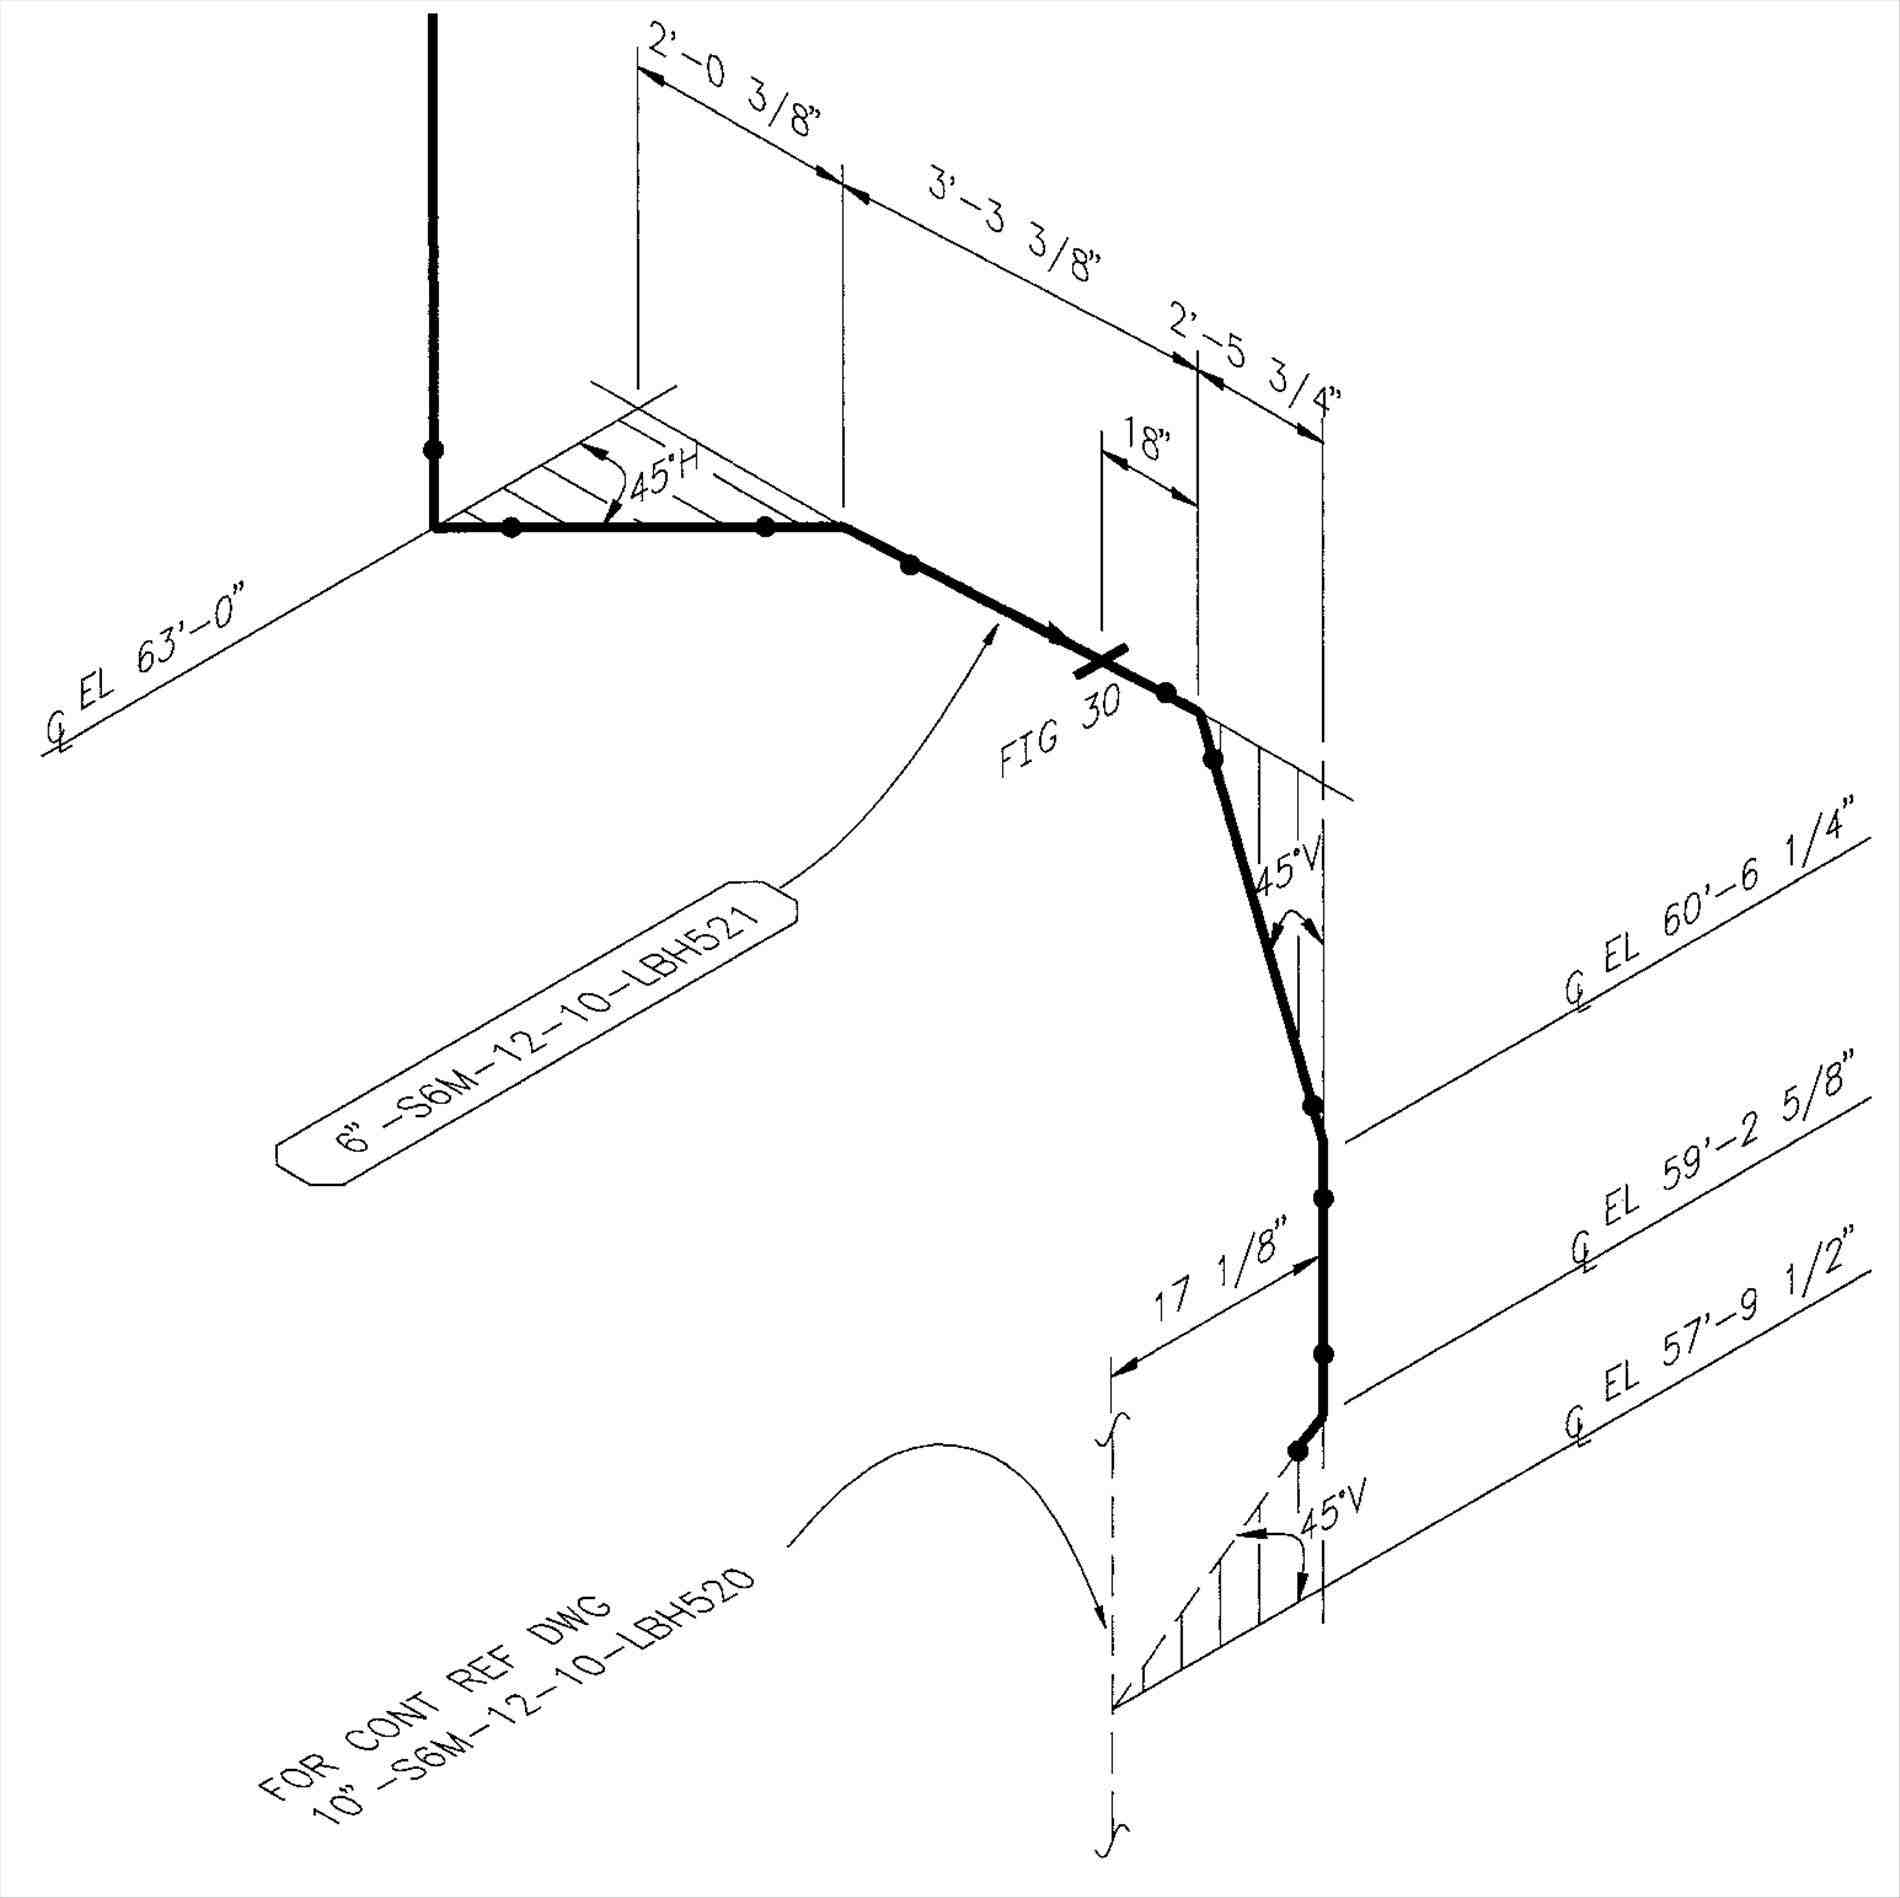 how to read isometric piping drawings